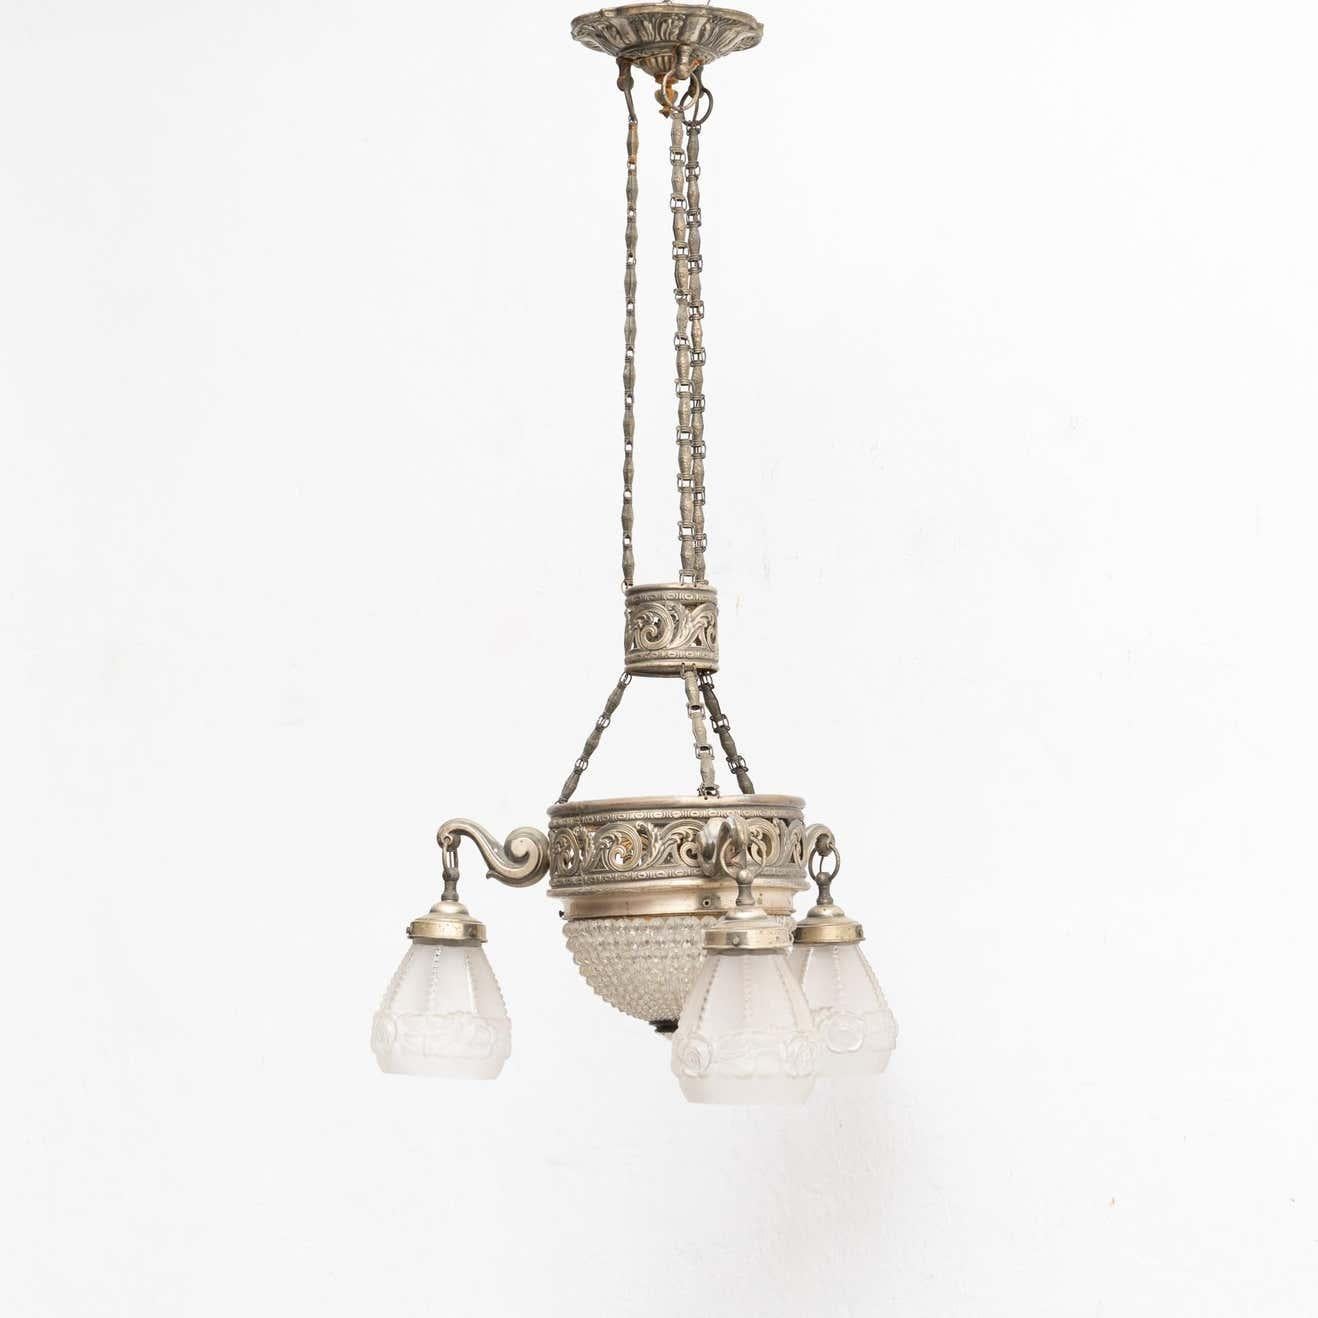 Vintage French Metal and Glass Art Deco Ceiling Lamp, circa 1930 For Sale 4